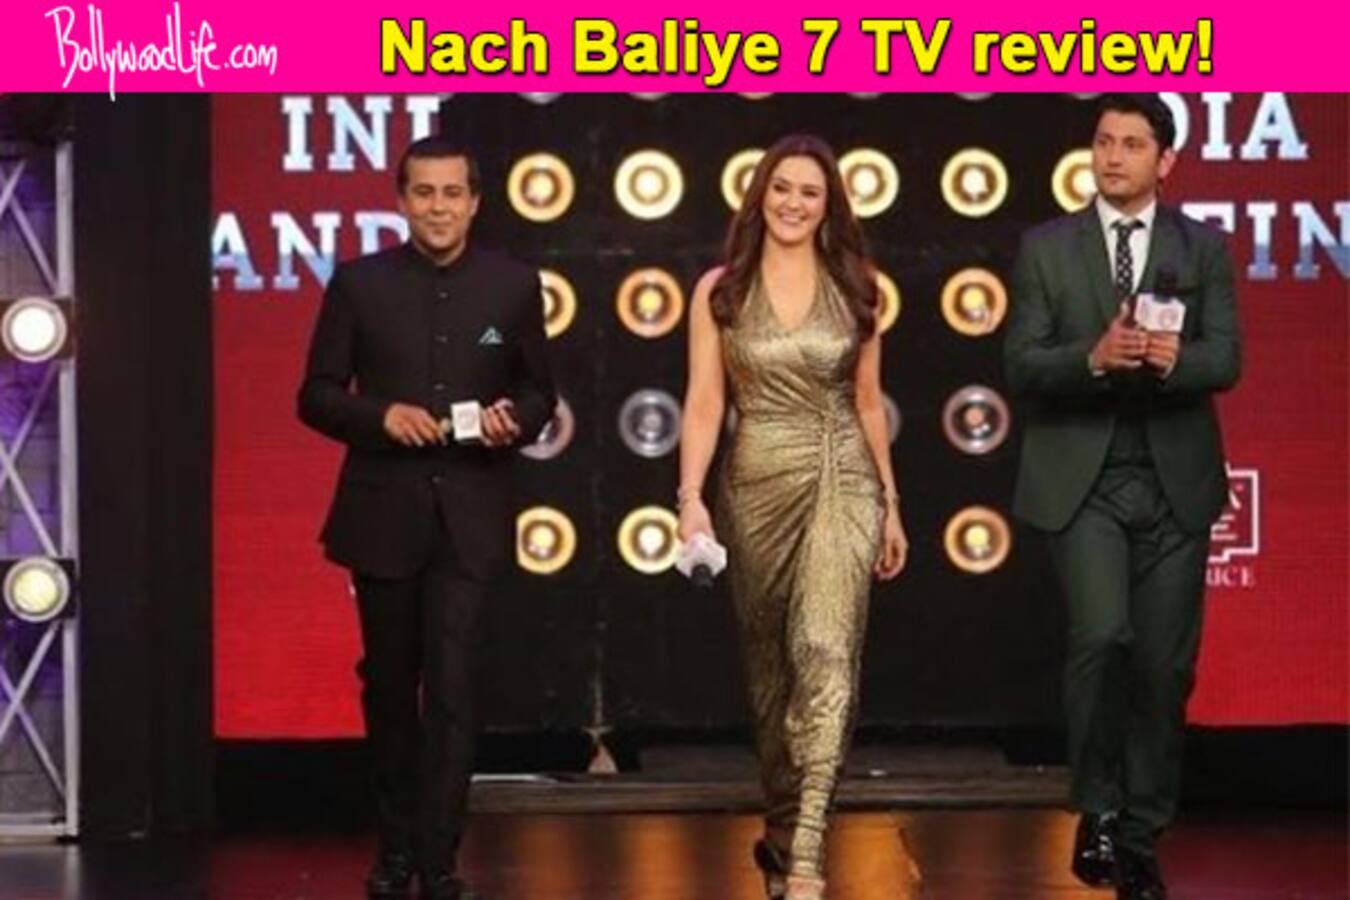 Nach Baliye 7 TV review: Chetan Bhagat impresses as a judge, while Preity Zinta disappoints!